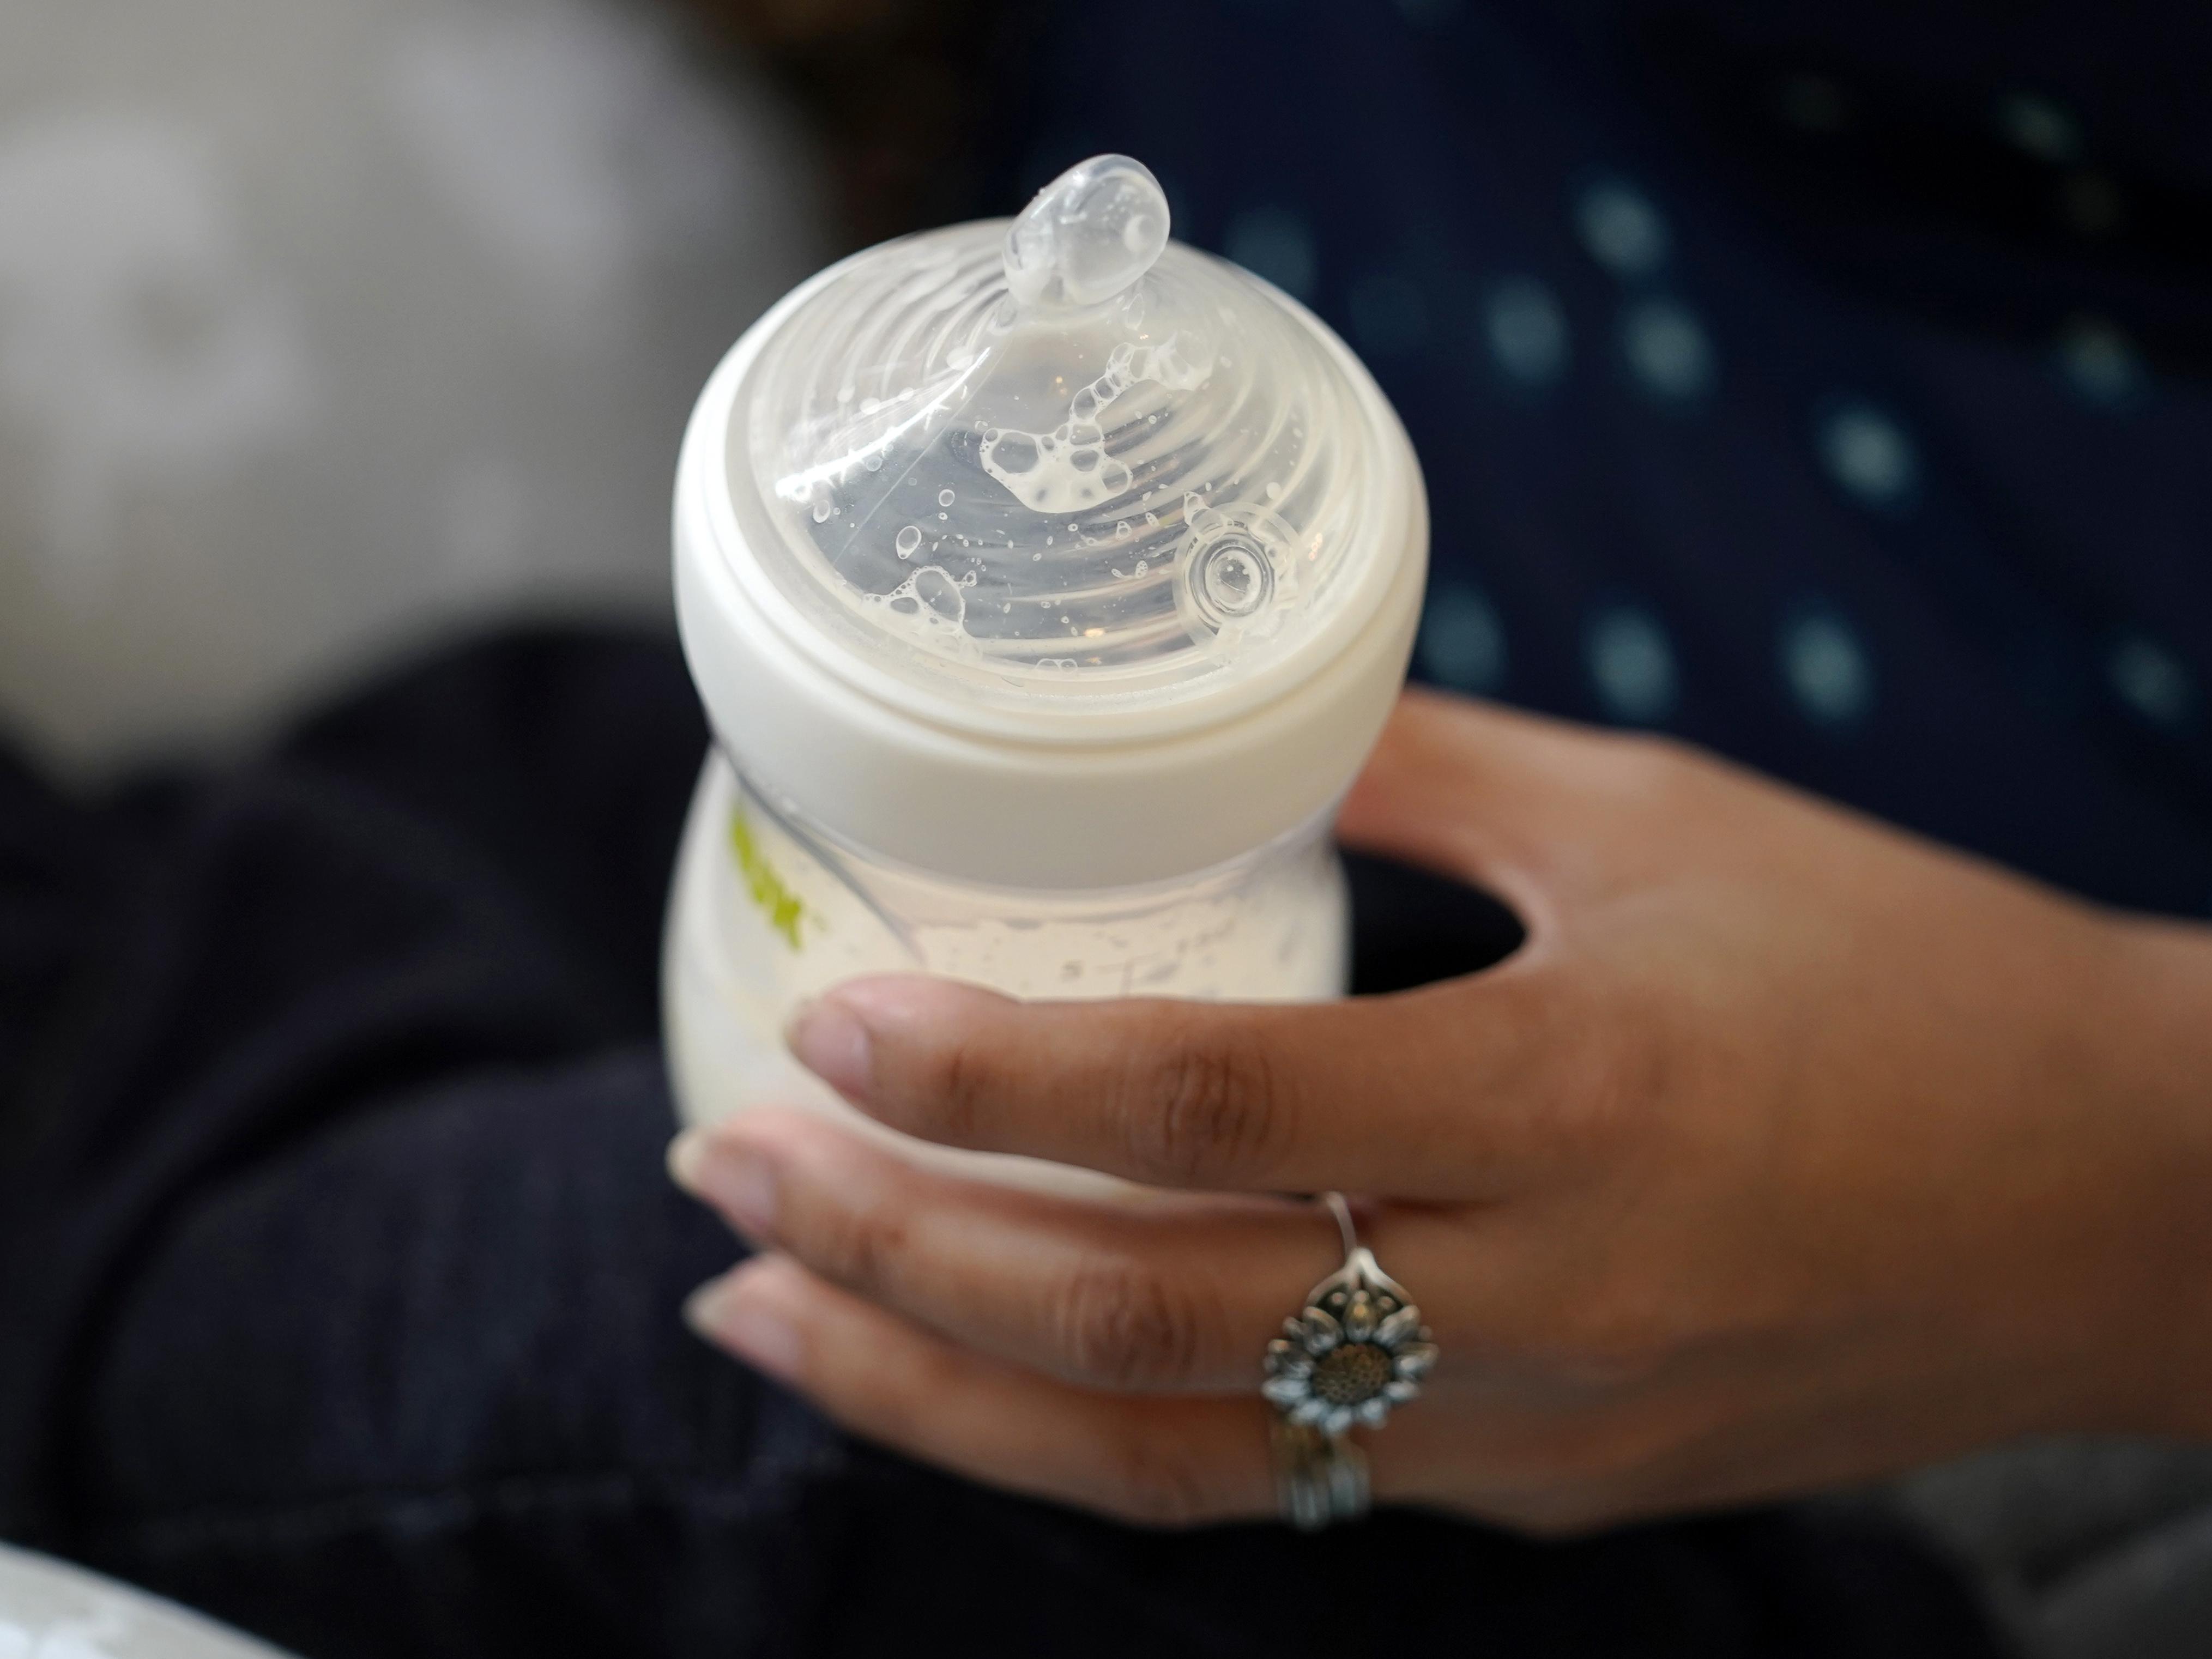 Best Of Insight” Infant Formula Shortage Study Mayor Sheng Thao is First Hmong to lead Major